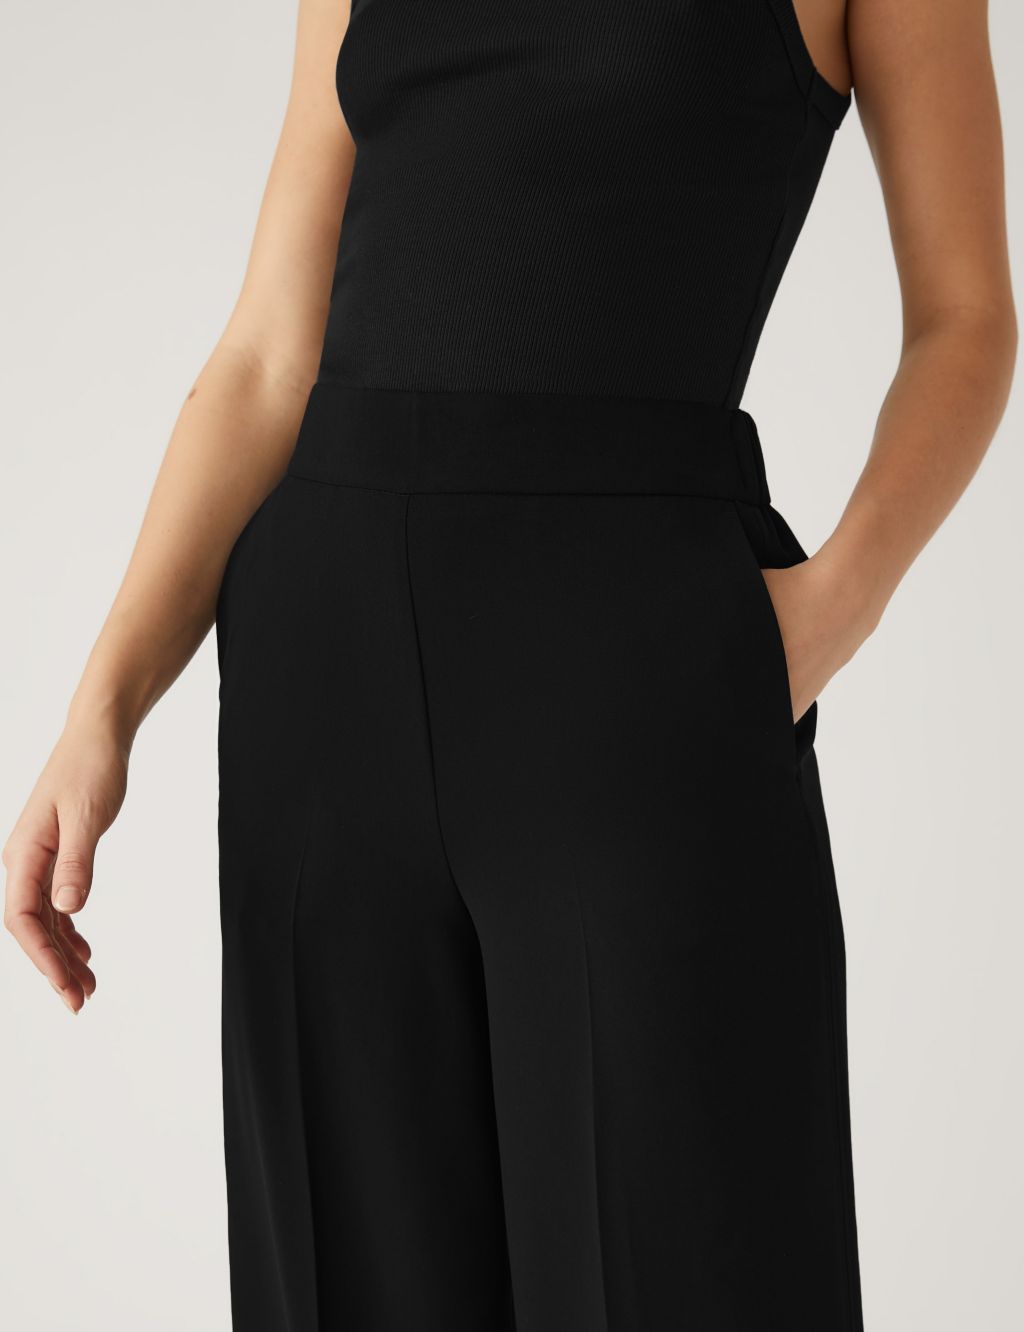 Pull On Wide Leg Trousers image 3